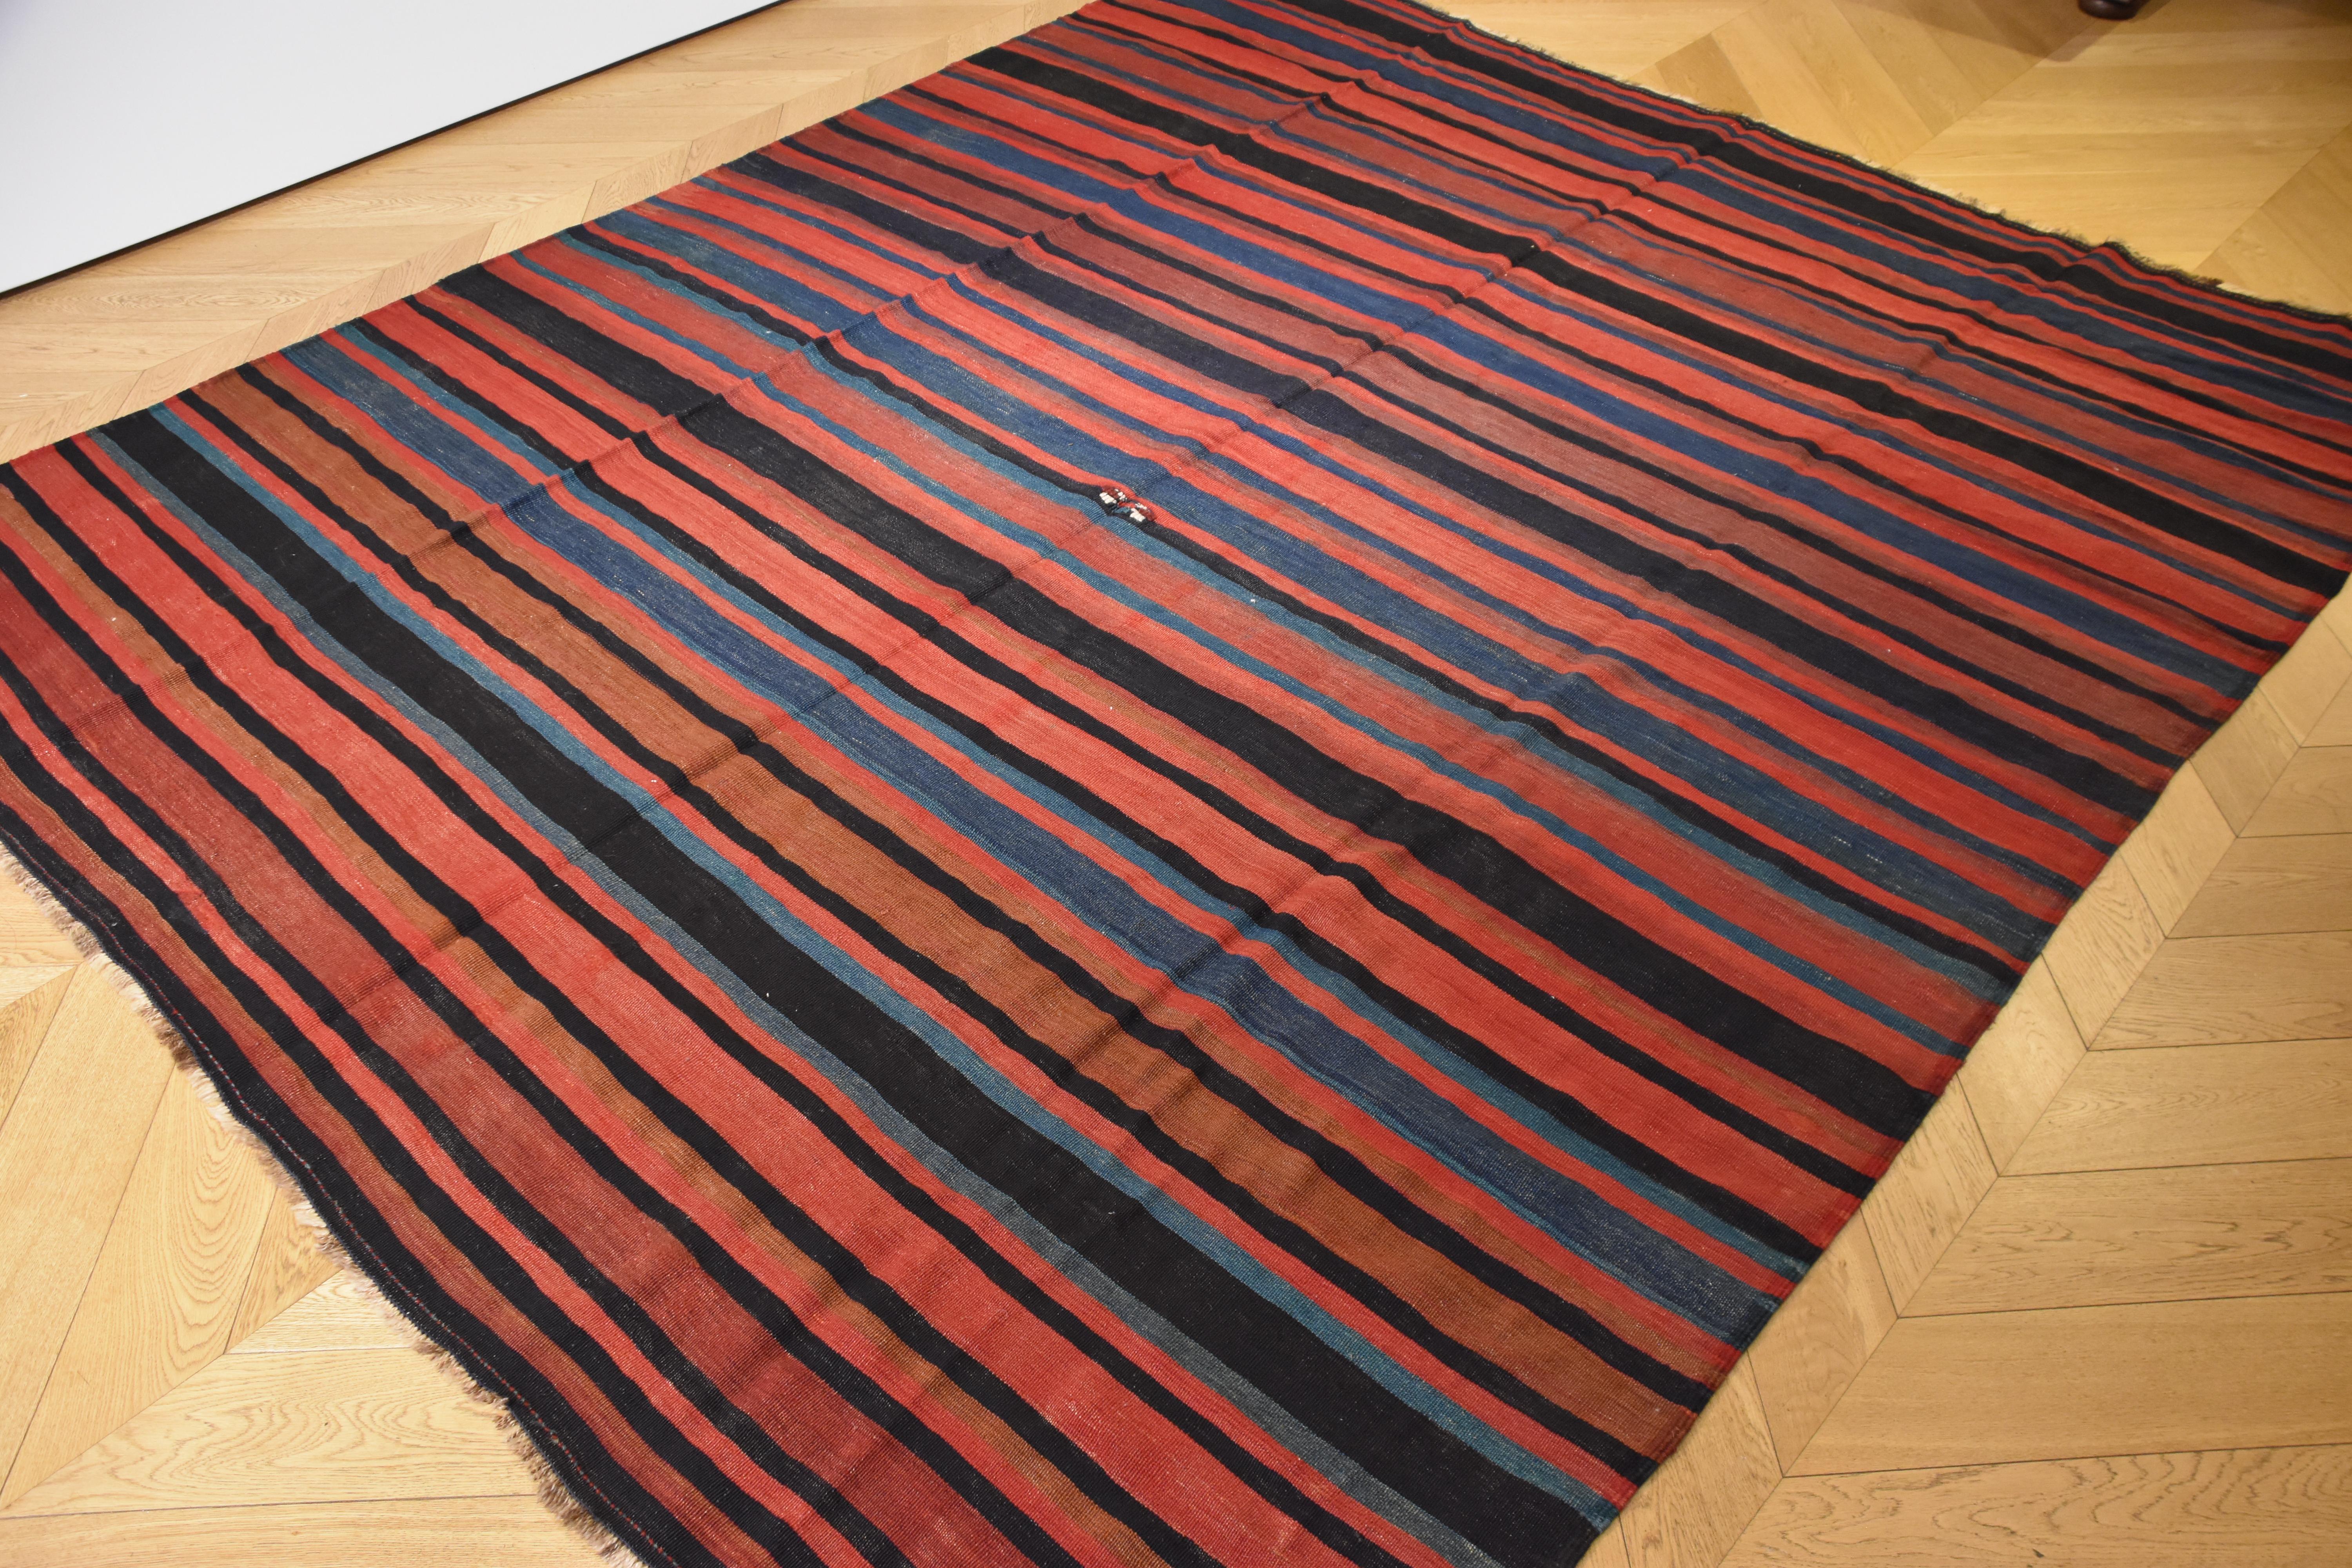 Armenian 21st Century Red and Blue Nomadic Kurdish Stripes Kilim Rug in Wool, circa 1900s For Sale